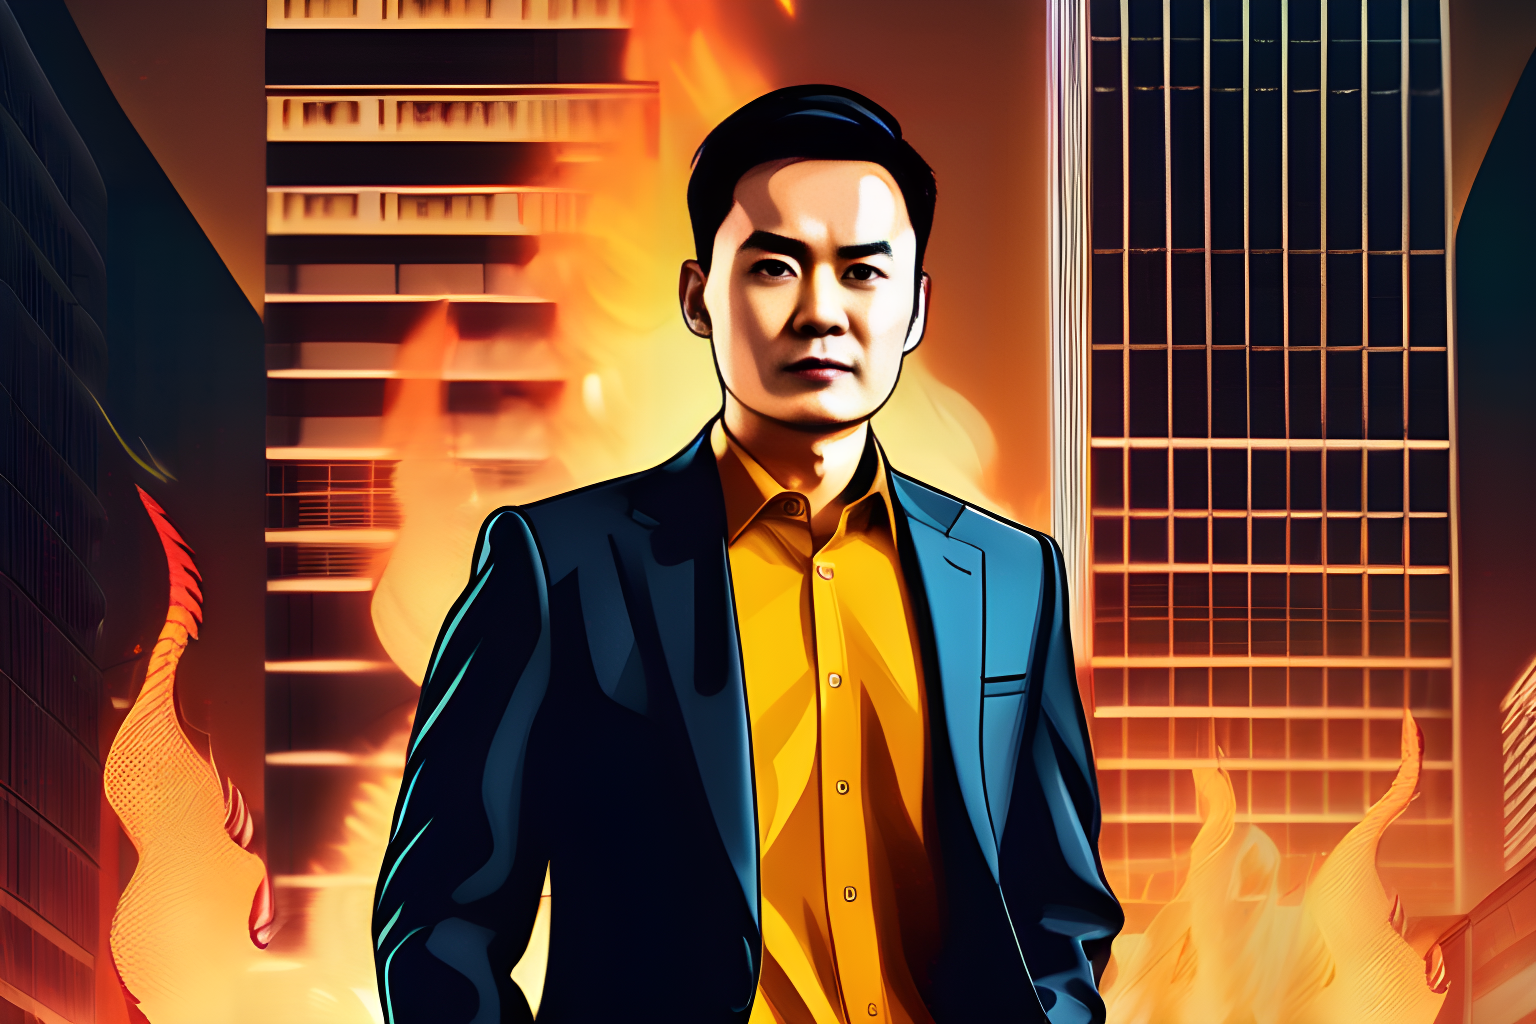 Generate an illustrative image of Changpeng Zhao (CZ), the CEO of Binance, standing confidently beside a burning building. Ensure that CZ's facial features and attire are accurately represented, and the burning building is depicted realistically with flames and smoke